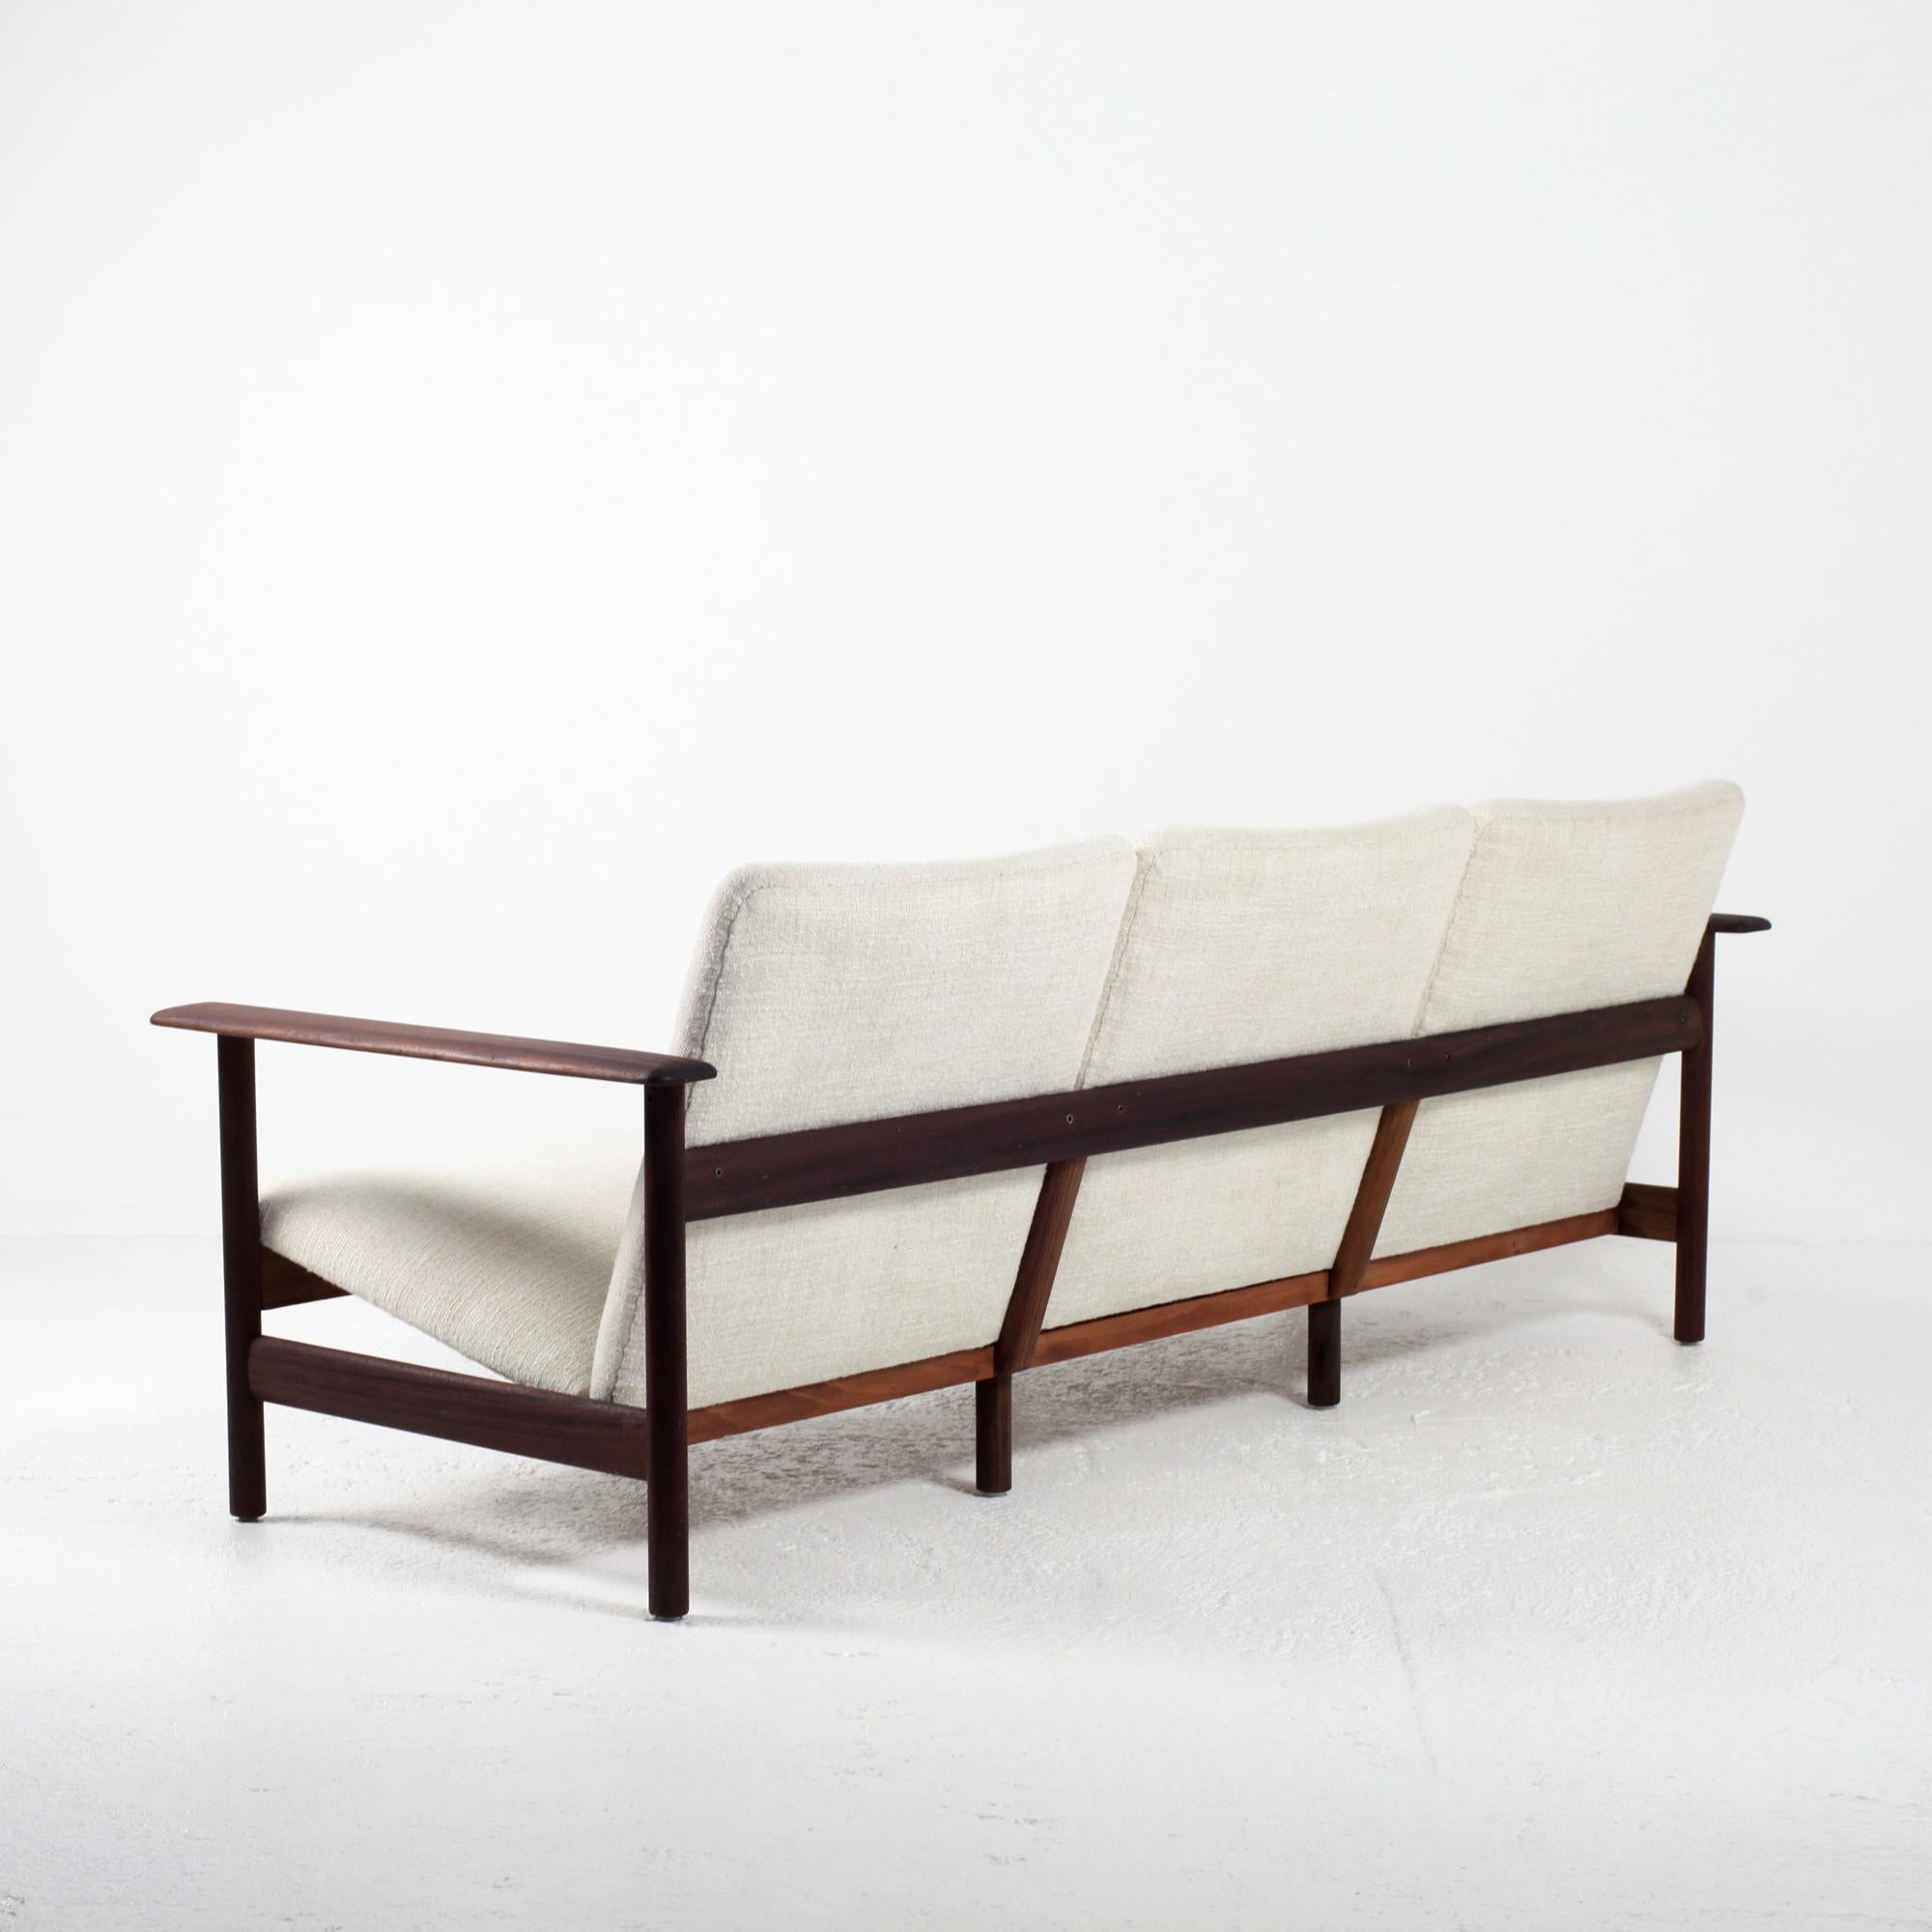 Oiled Steiner Sofa Solid Wood Frame and Pierre Frey Fabric, France, 1960s For Sale